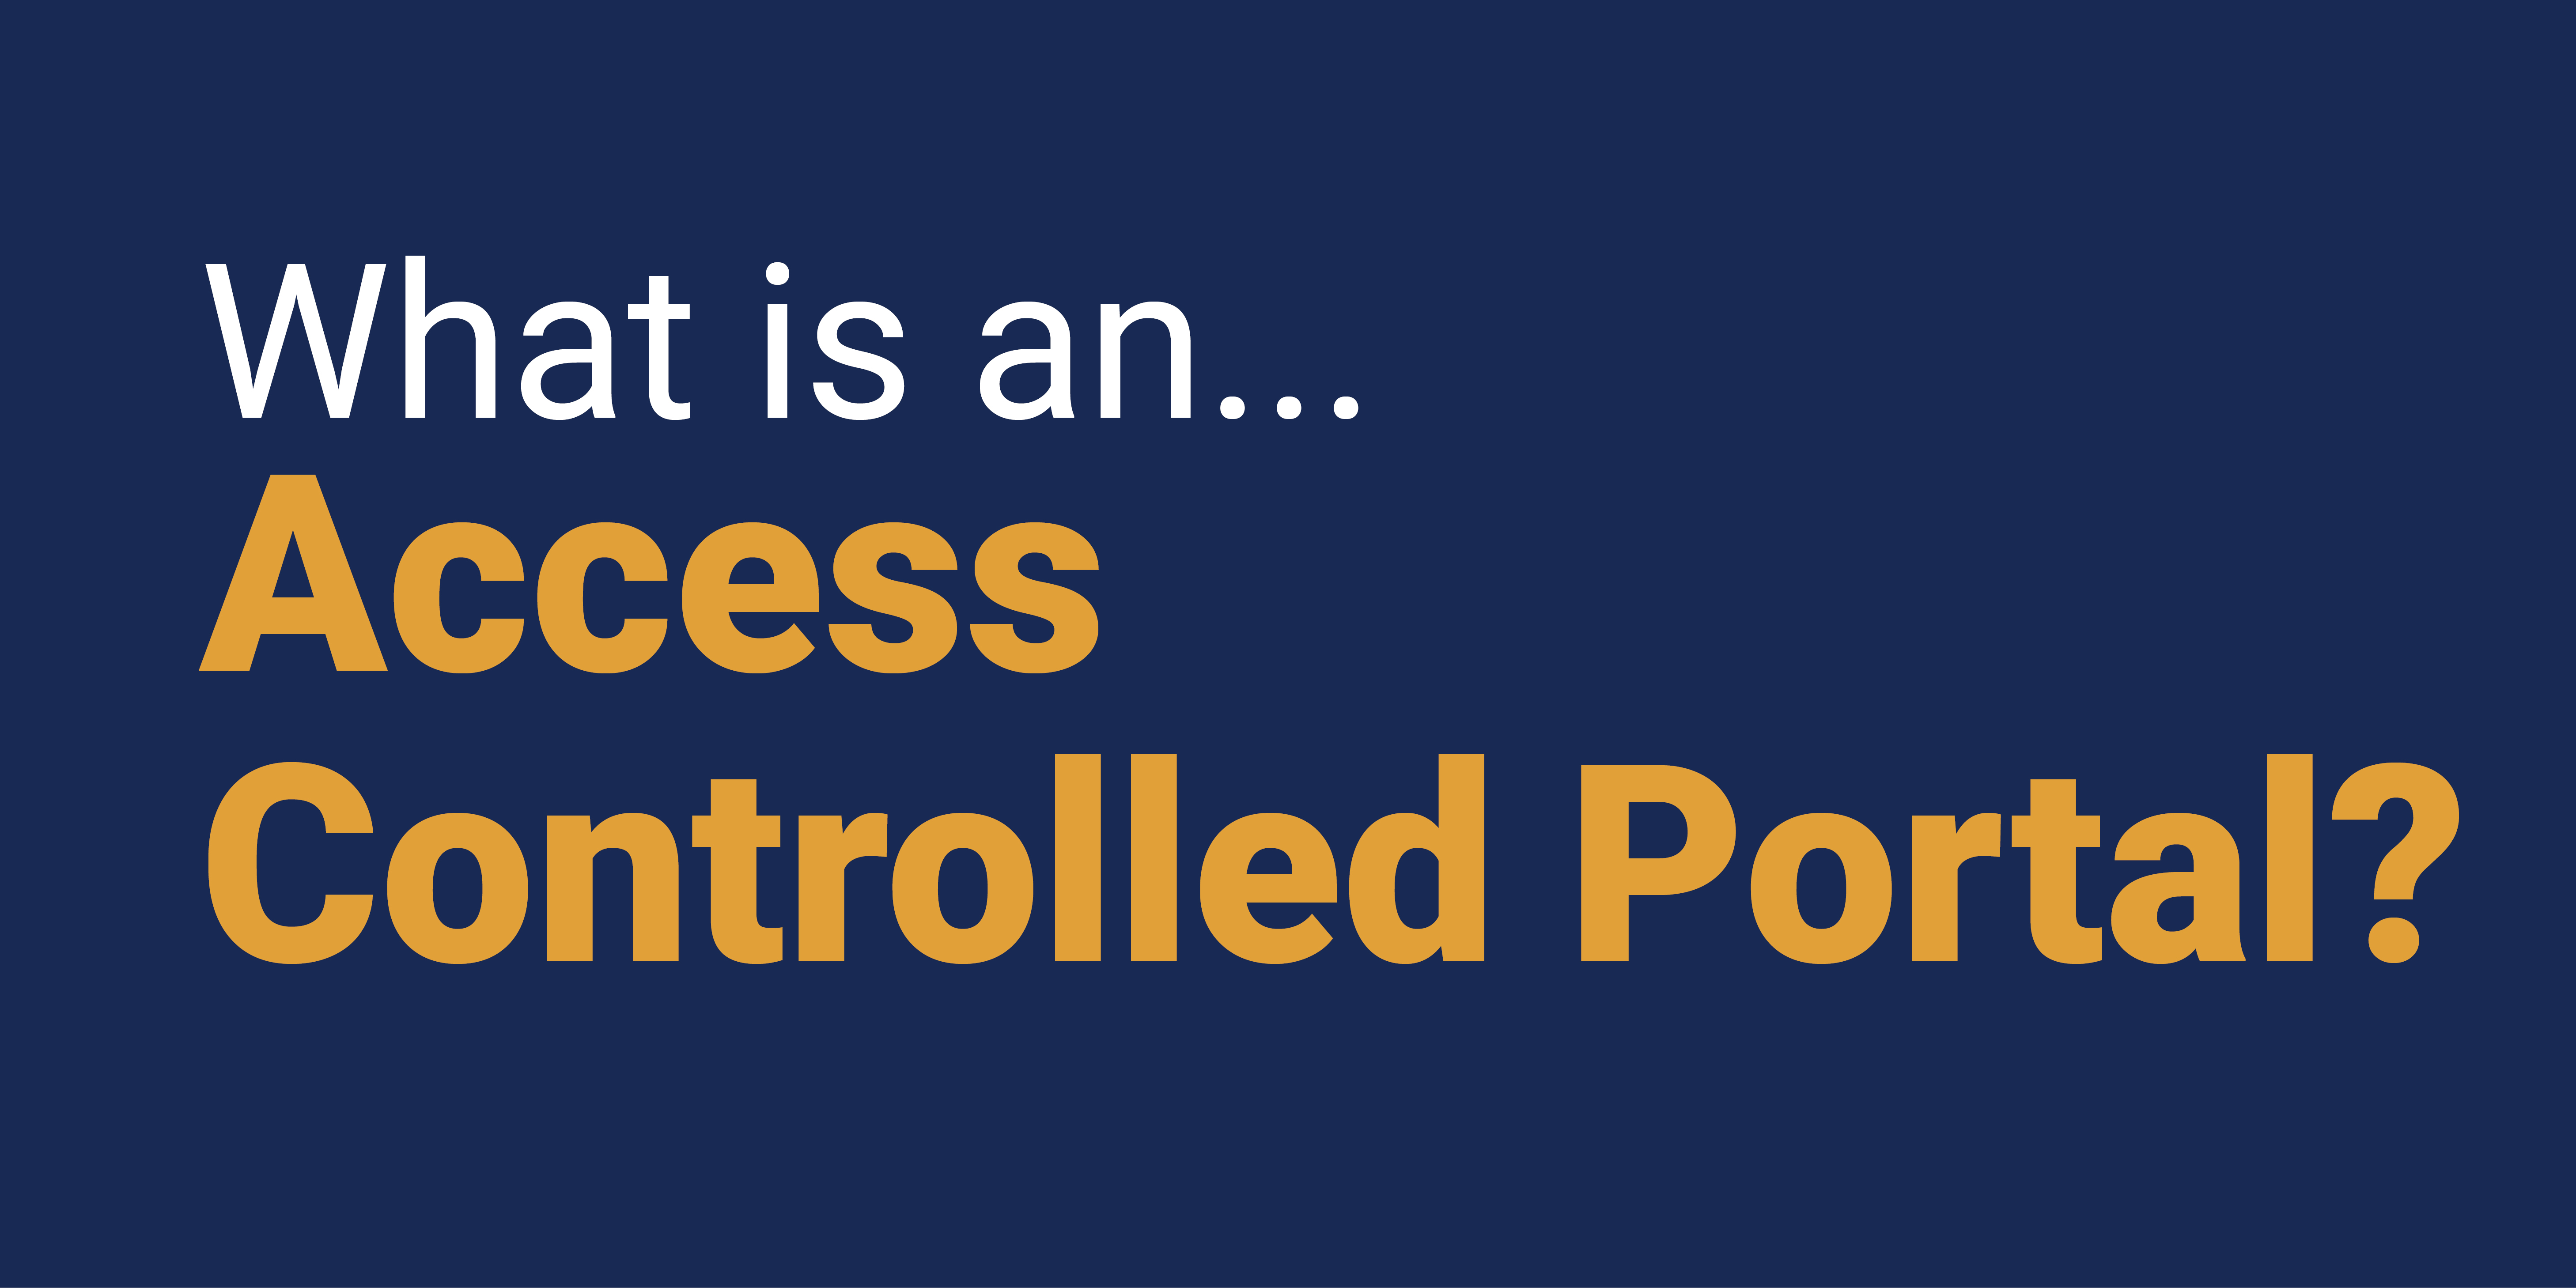 What is an Access Controlled Portal?